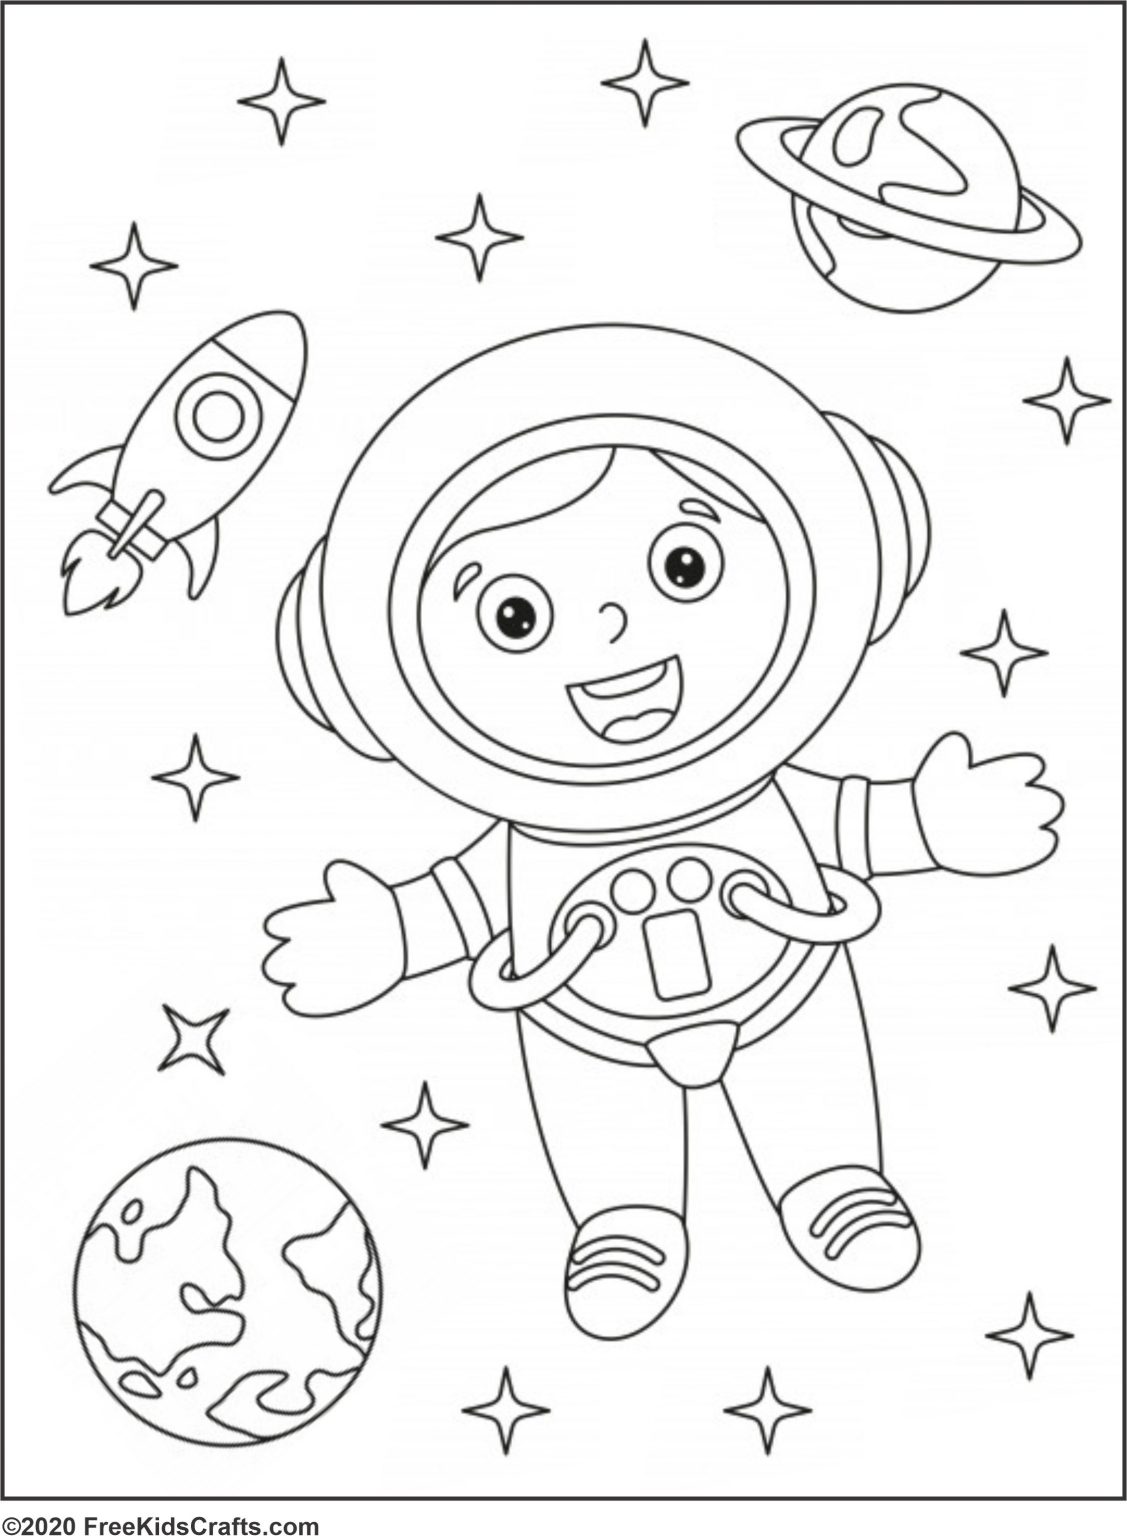 printable-space-coloring-pages